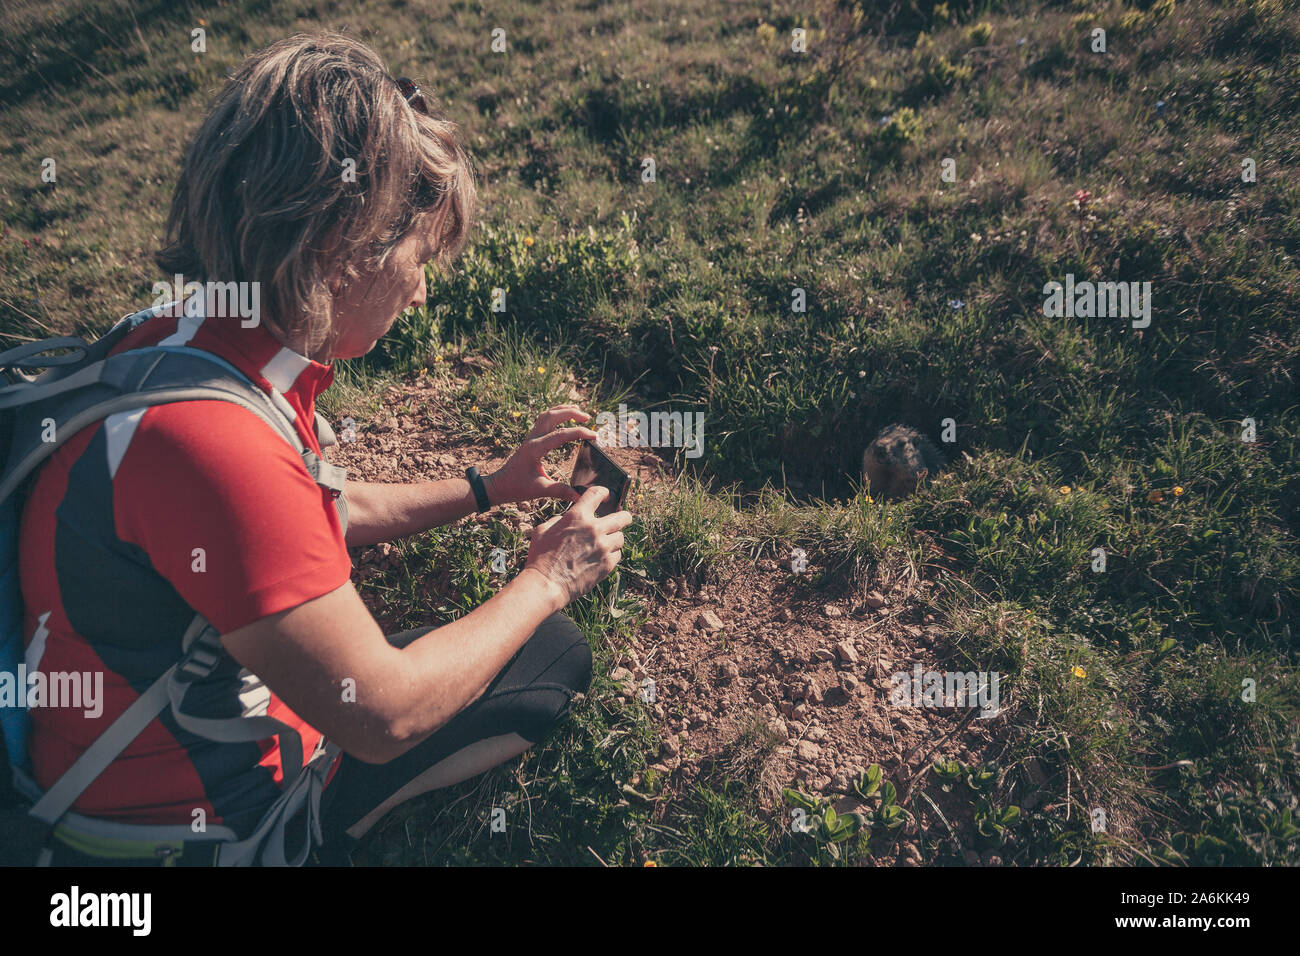 Woman intent on photographing a marmot with a smartphone Stock Photo